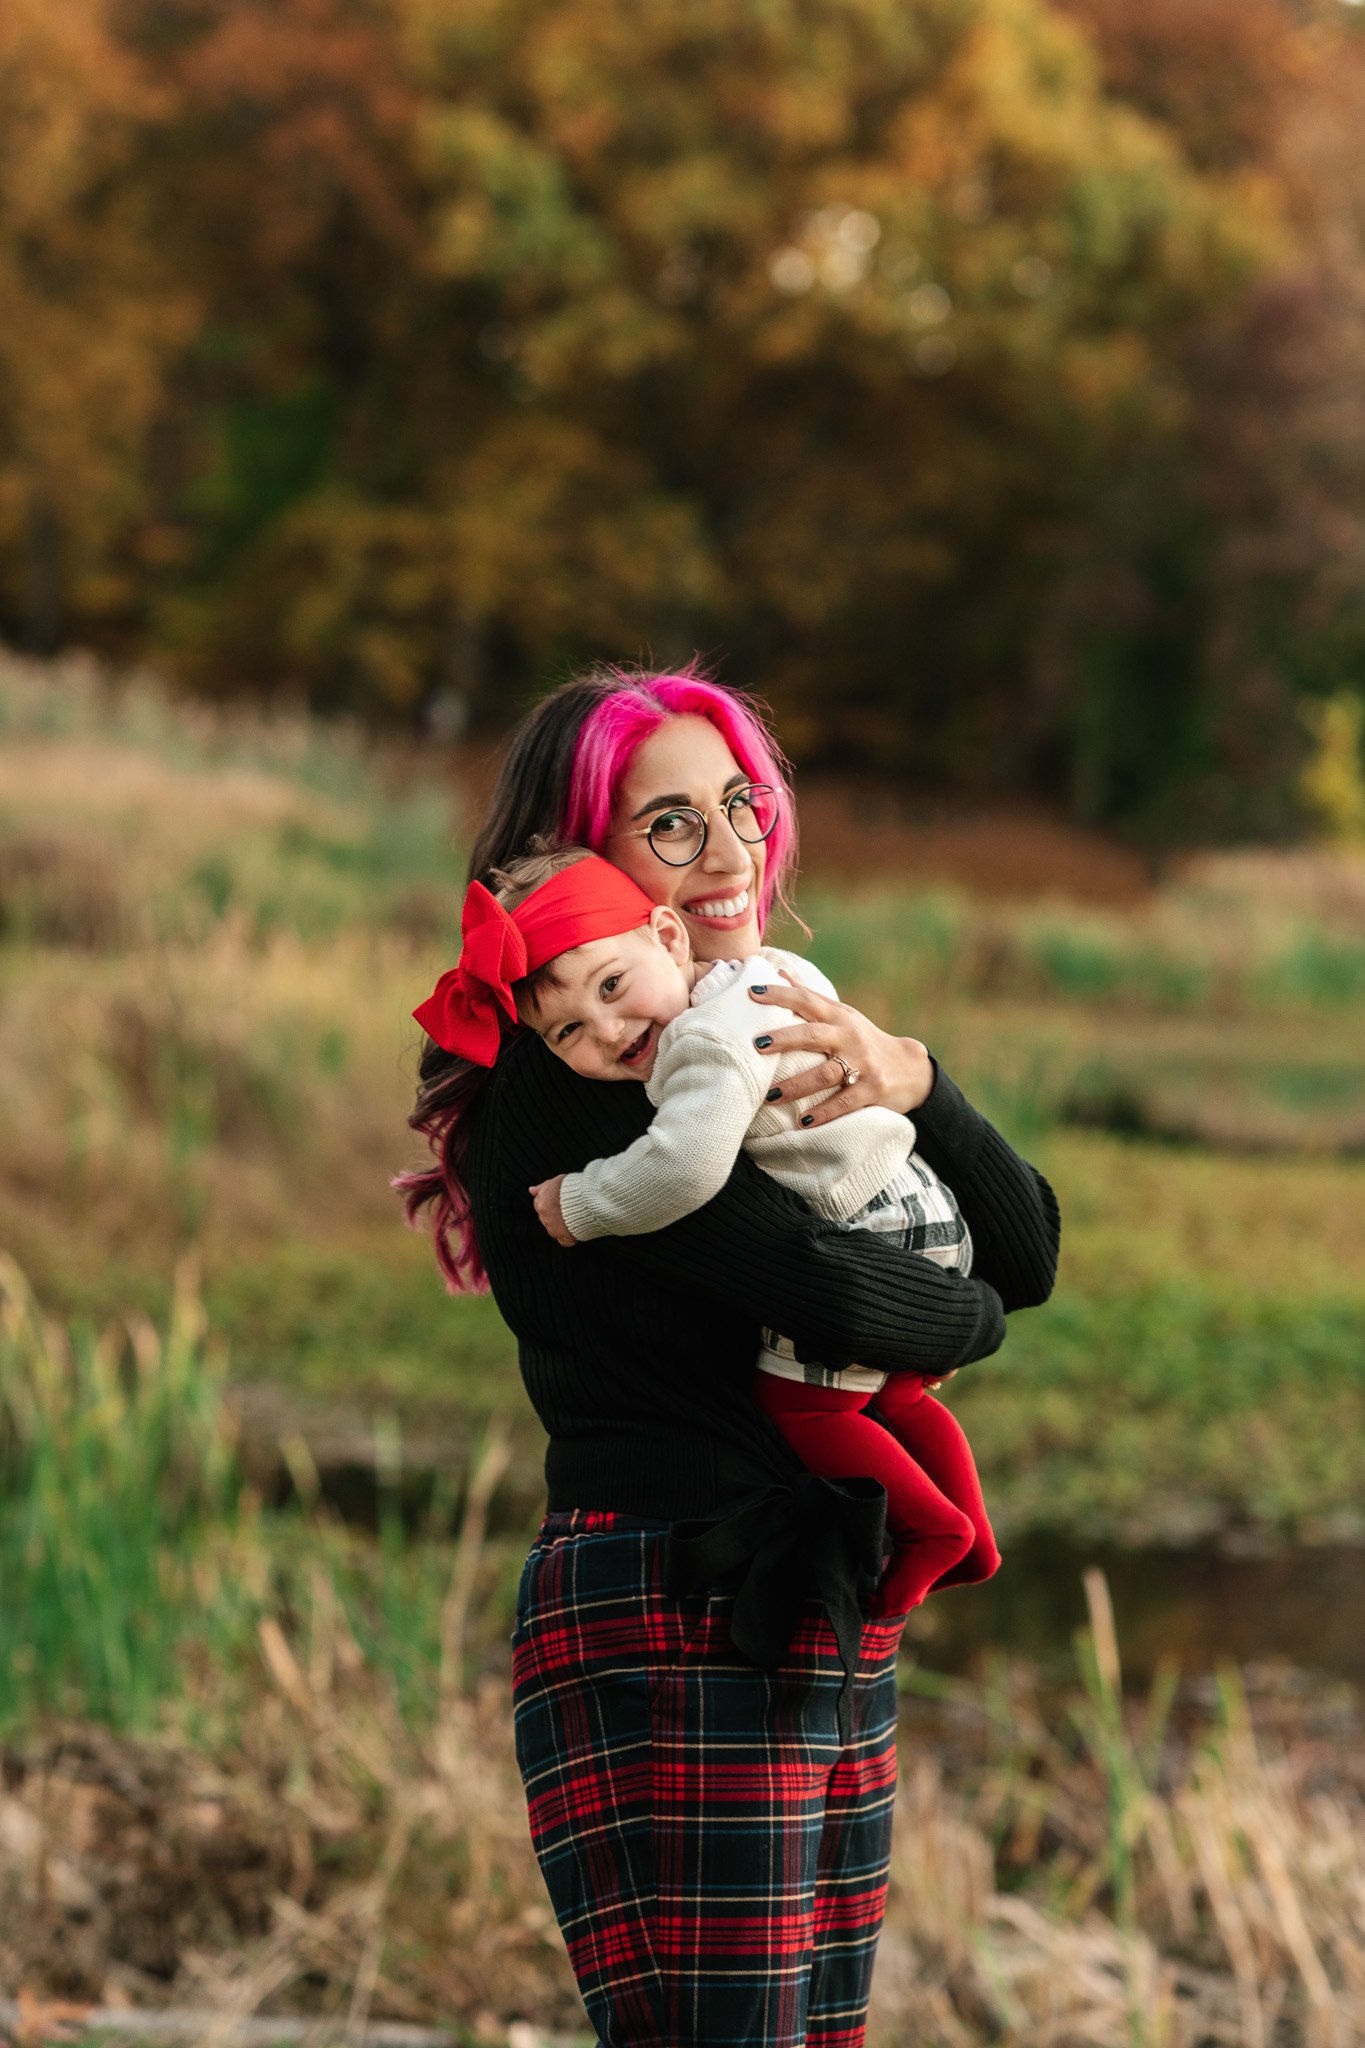  Nicole Hawkins Photography captures a baby girl hugging her mommy during fall family portraits in NJ. NJ fall portraits #NicoleHawkinsPhotography #NicoleHawkinsFamily #fallfamilyphotos #fallphotos #familyphotographerNJ #NJfallfamilypics 